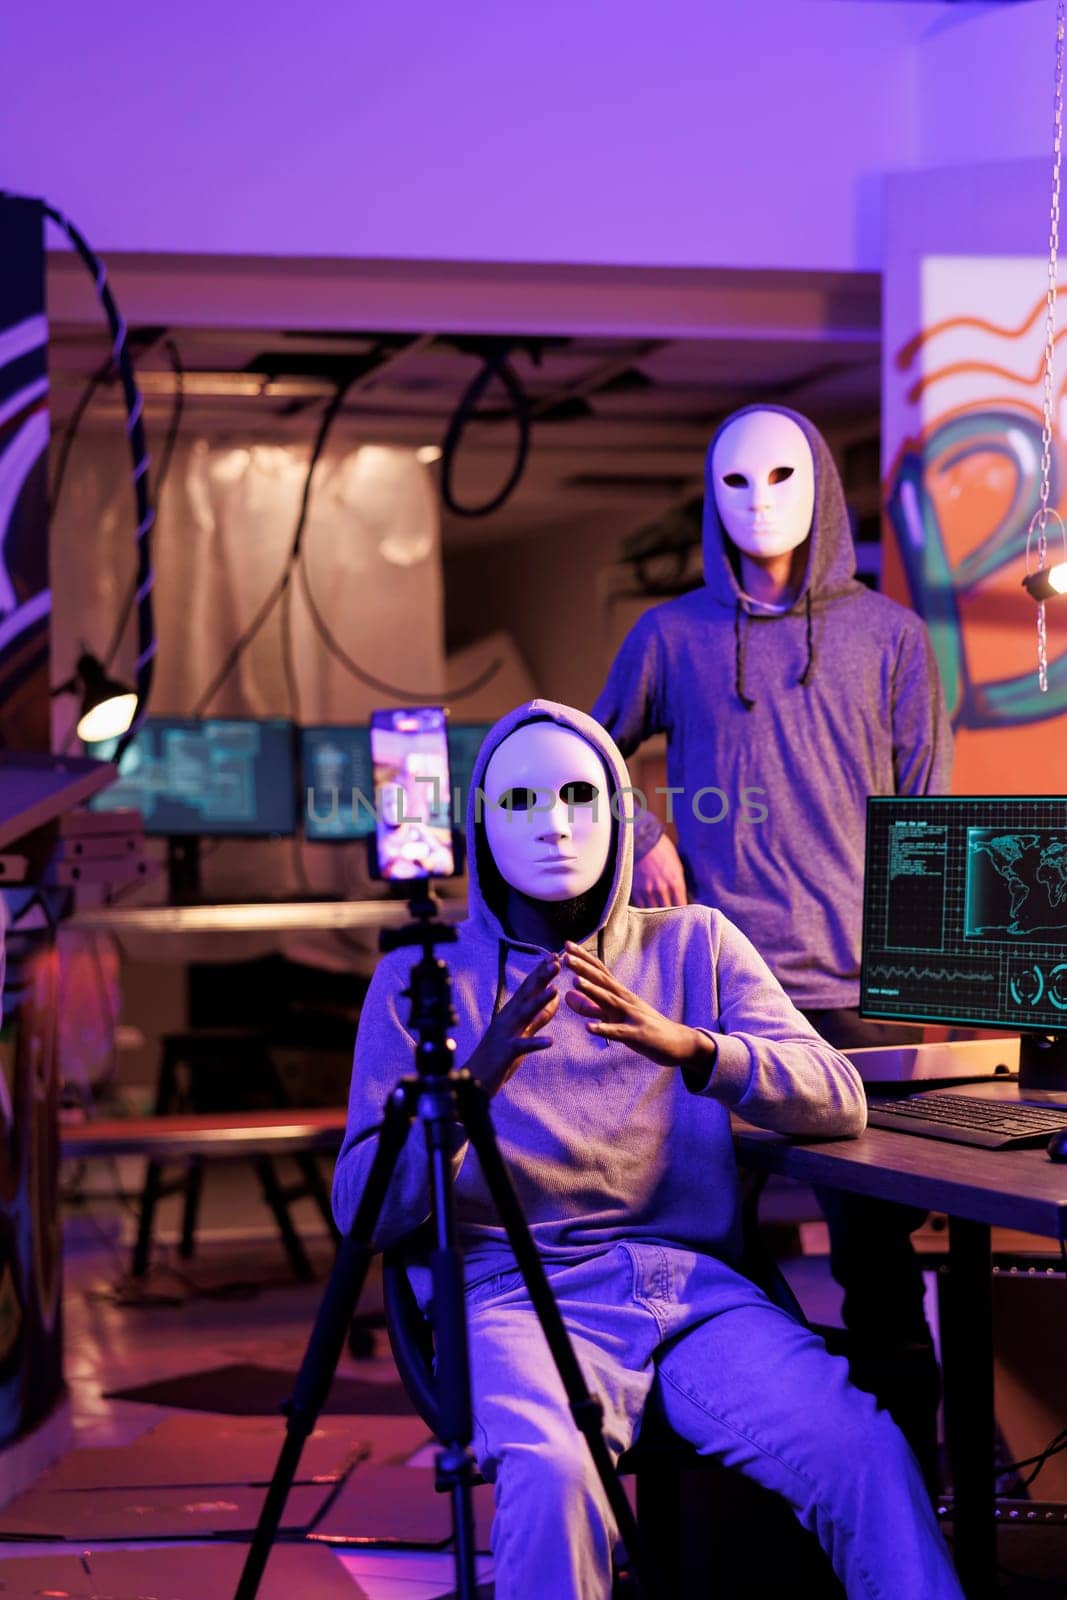 Hackers live streaming criminal activity by DCStudio